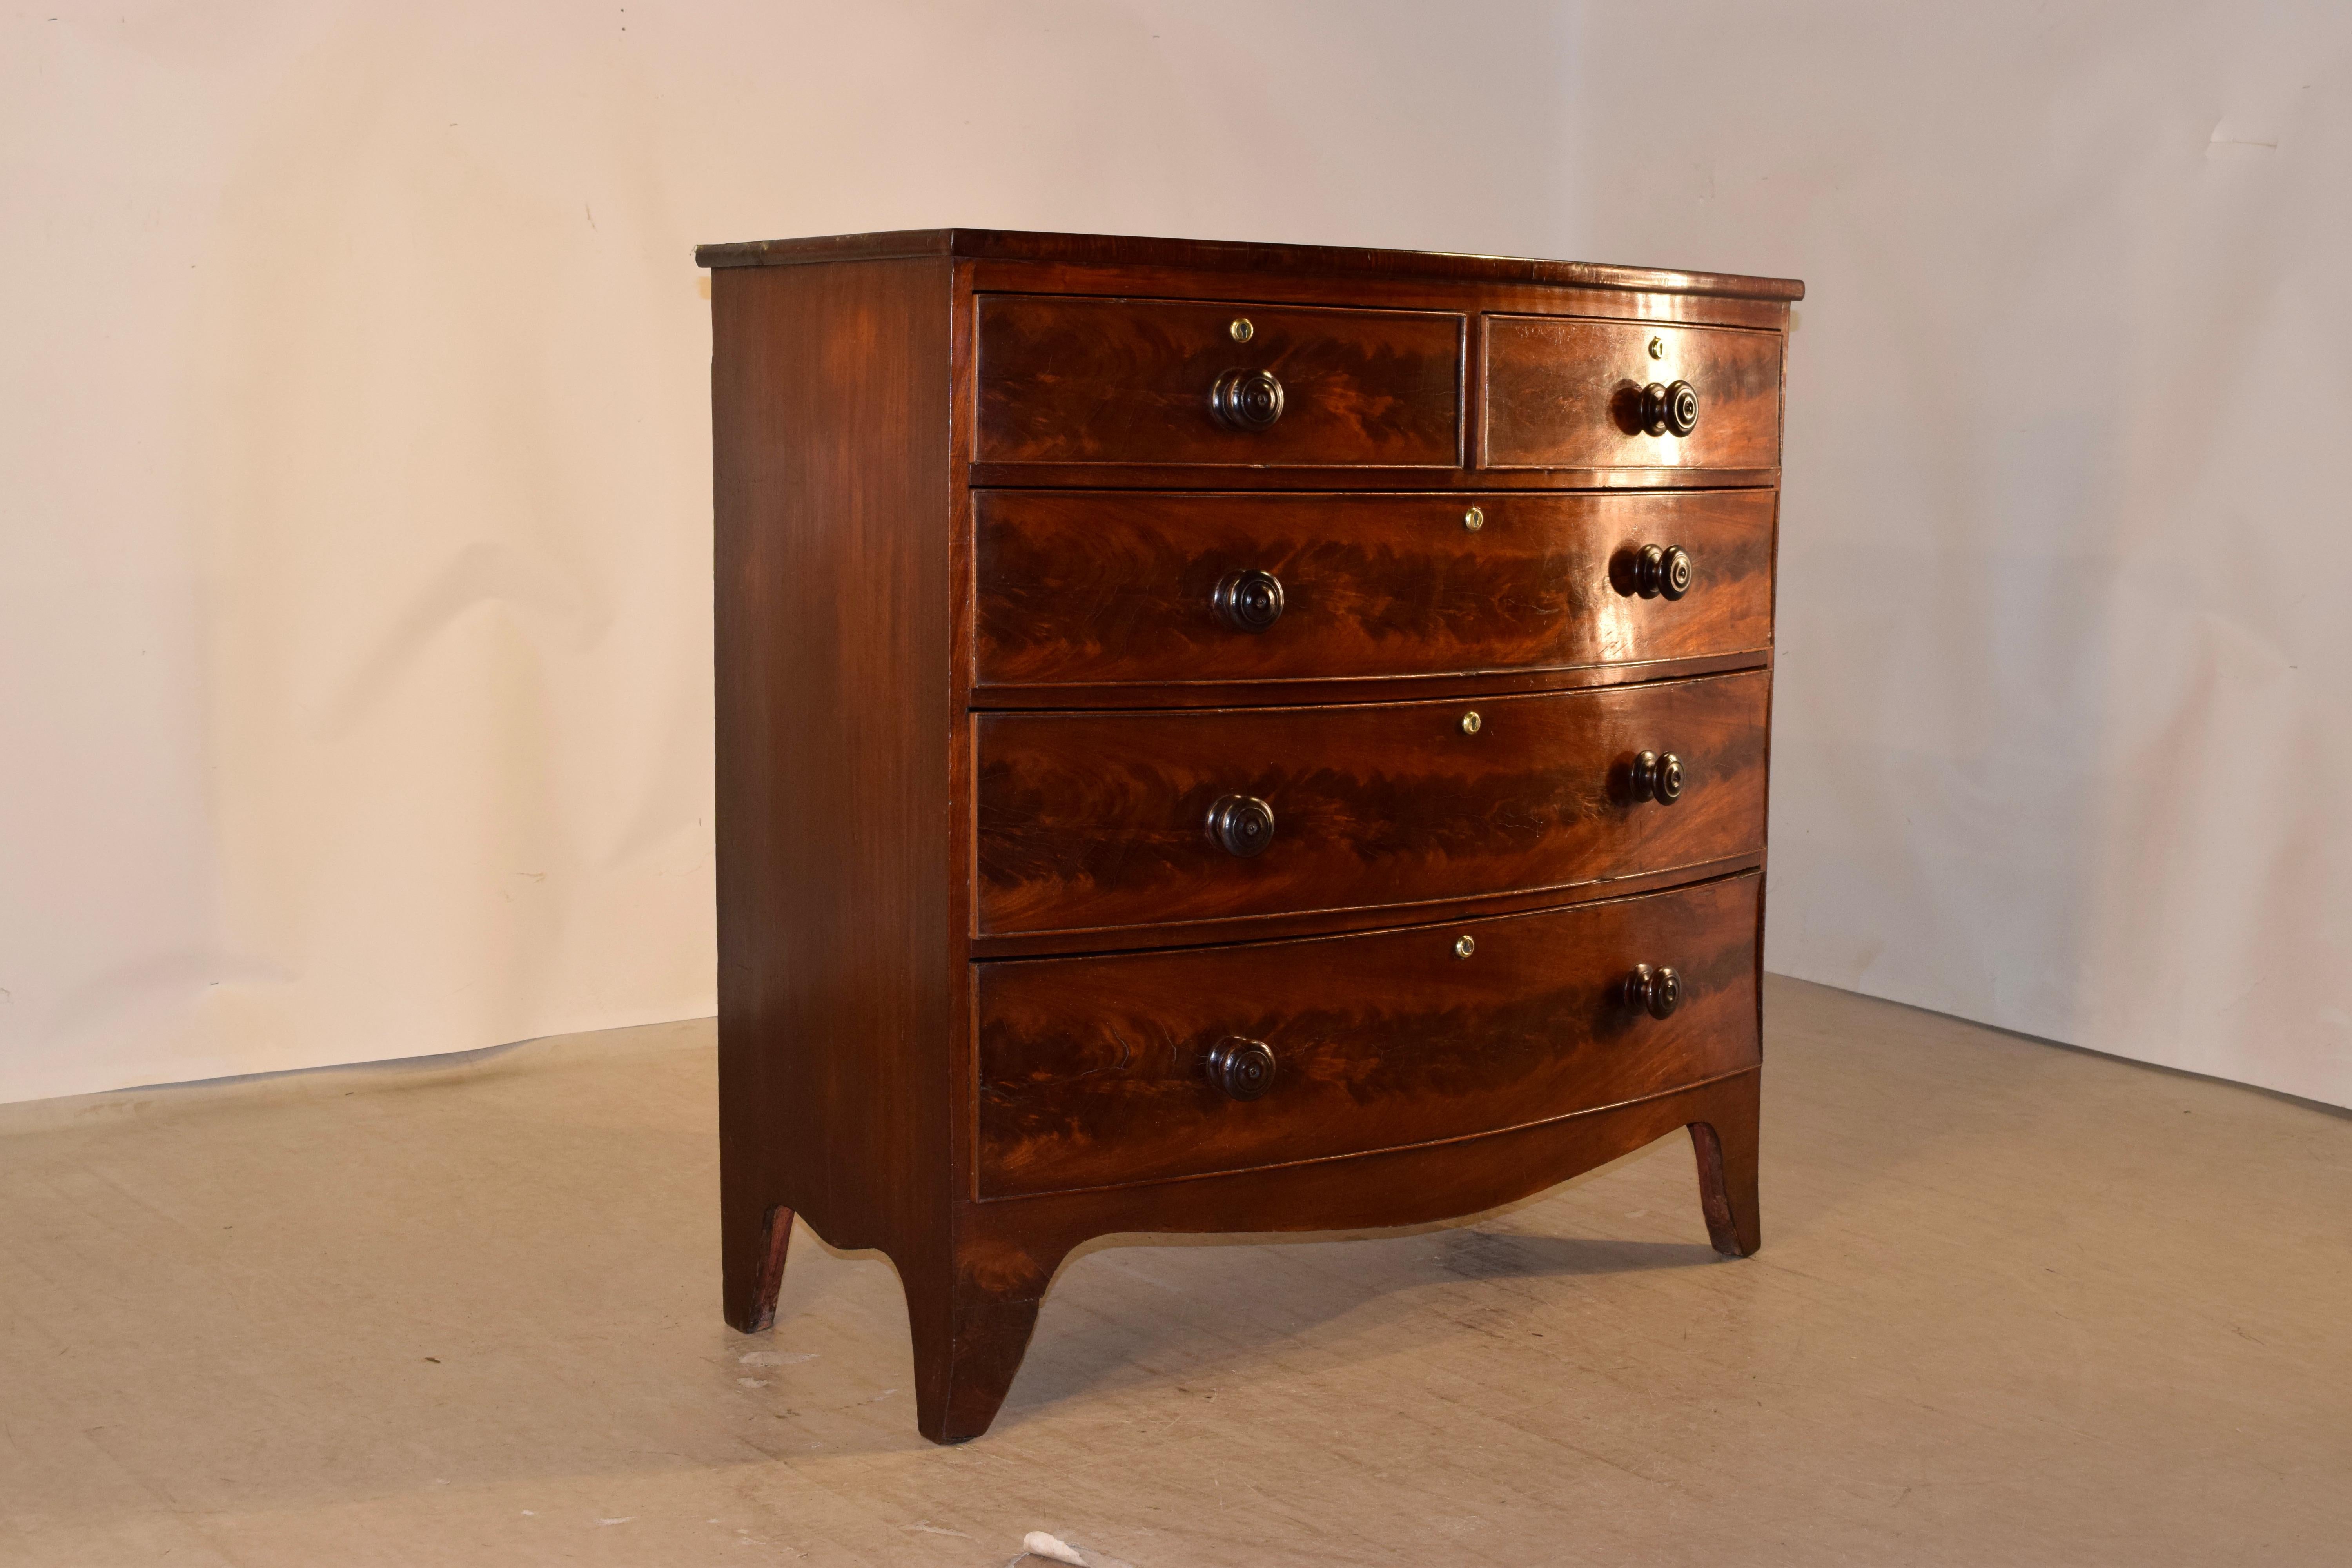 19th century mahogany bow front chest of drawers from England. The chest features a wonderfully grained fiddleback mahogany top, along with fiddleback grained drawer fronts, which are most desirable. The chest has simple sides and two over three